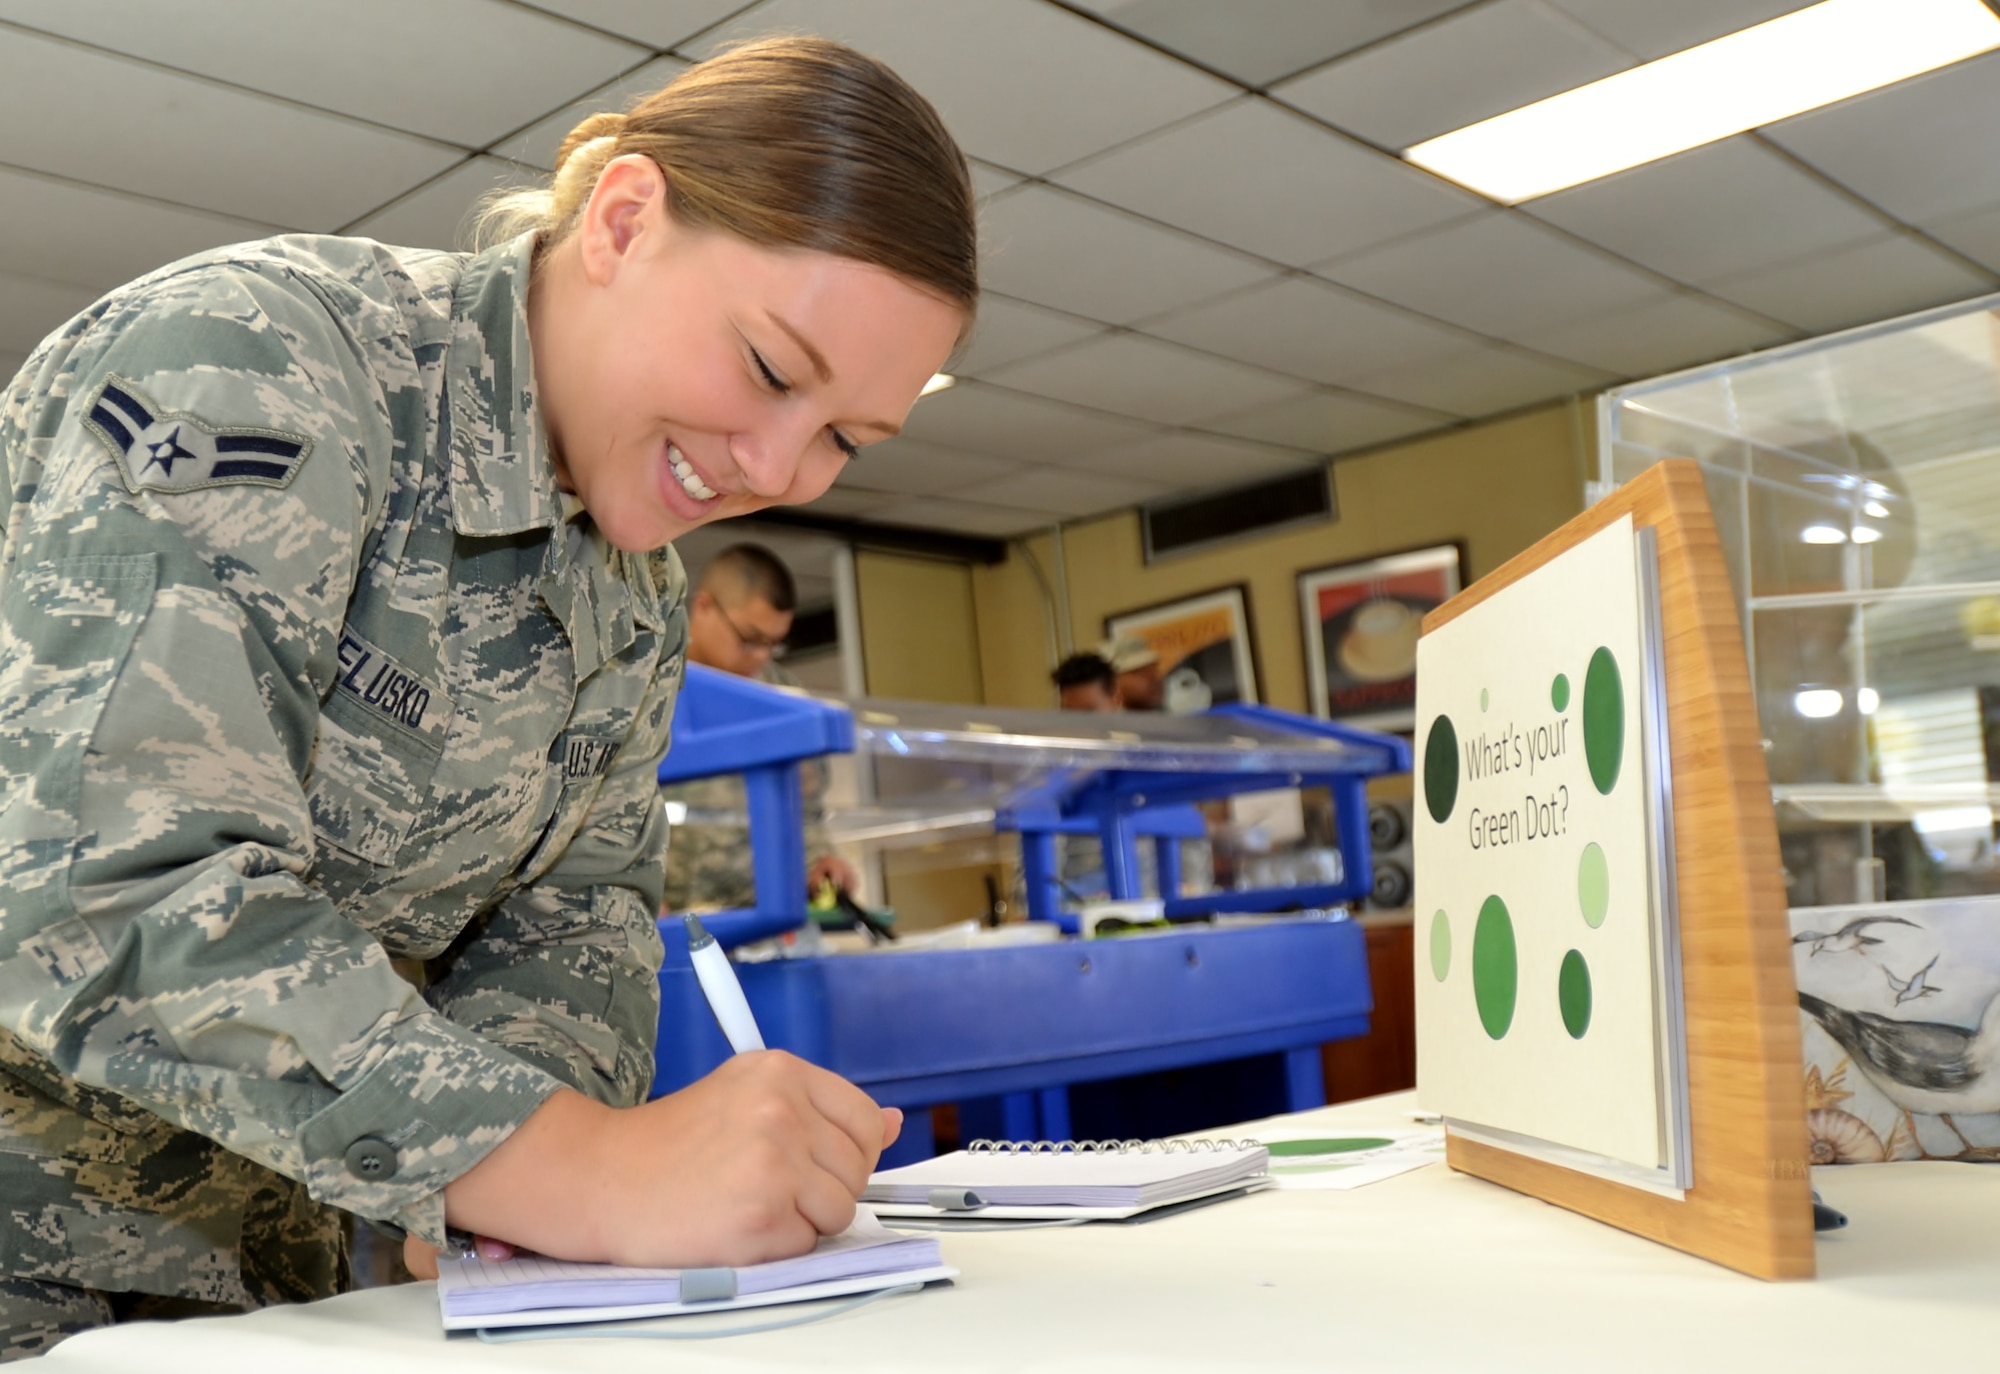 Senior Airman Shawna Belusko, 111th Logistics Readiness Squadron, participates in a Green Dot reminder event hosted by the 111th Force Support Squadron Services Flight and 111th Attack Wing Green Dot program implementers in the dining facility at Horsham Air Guard Station, Pa. Oct. 15, 2016. The program offered green-iced cookies alongside the opportunity for members to write own down their Green Dot experiences. (U.S. Air National Guard photo by Tech. Sgt. Andria Allmond)